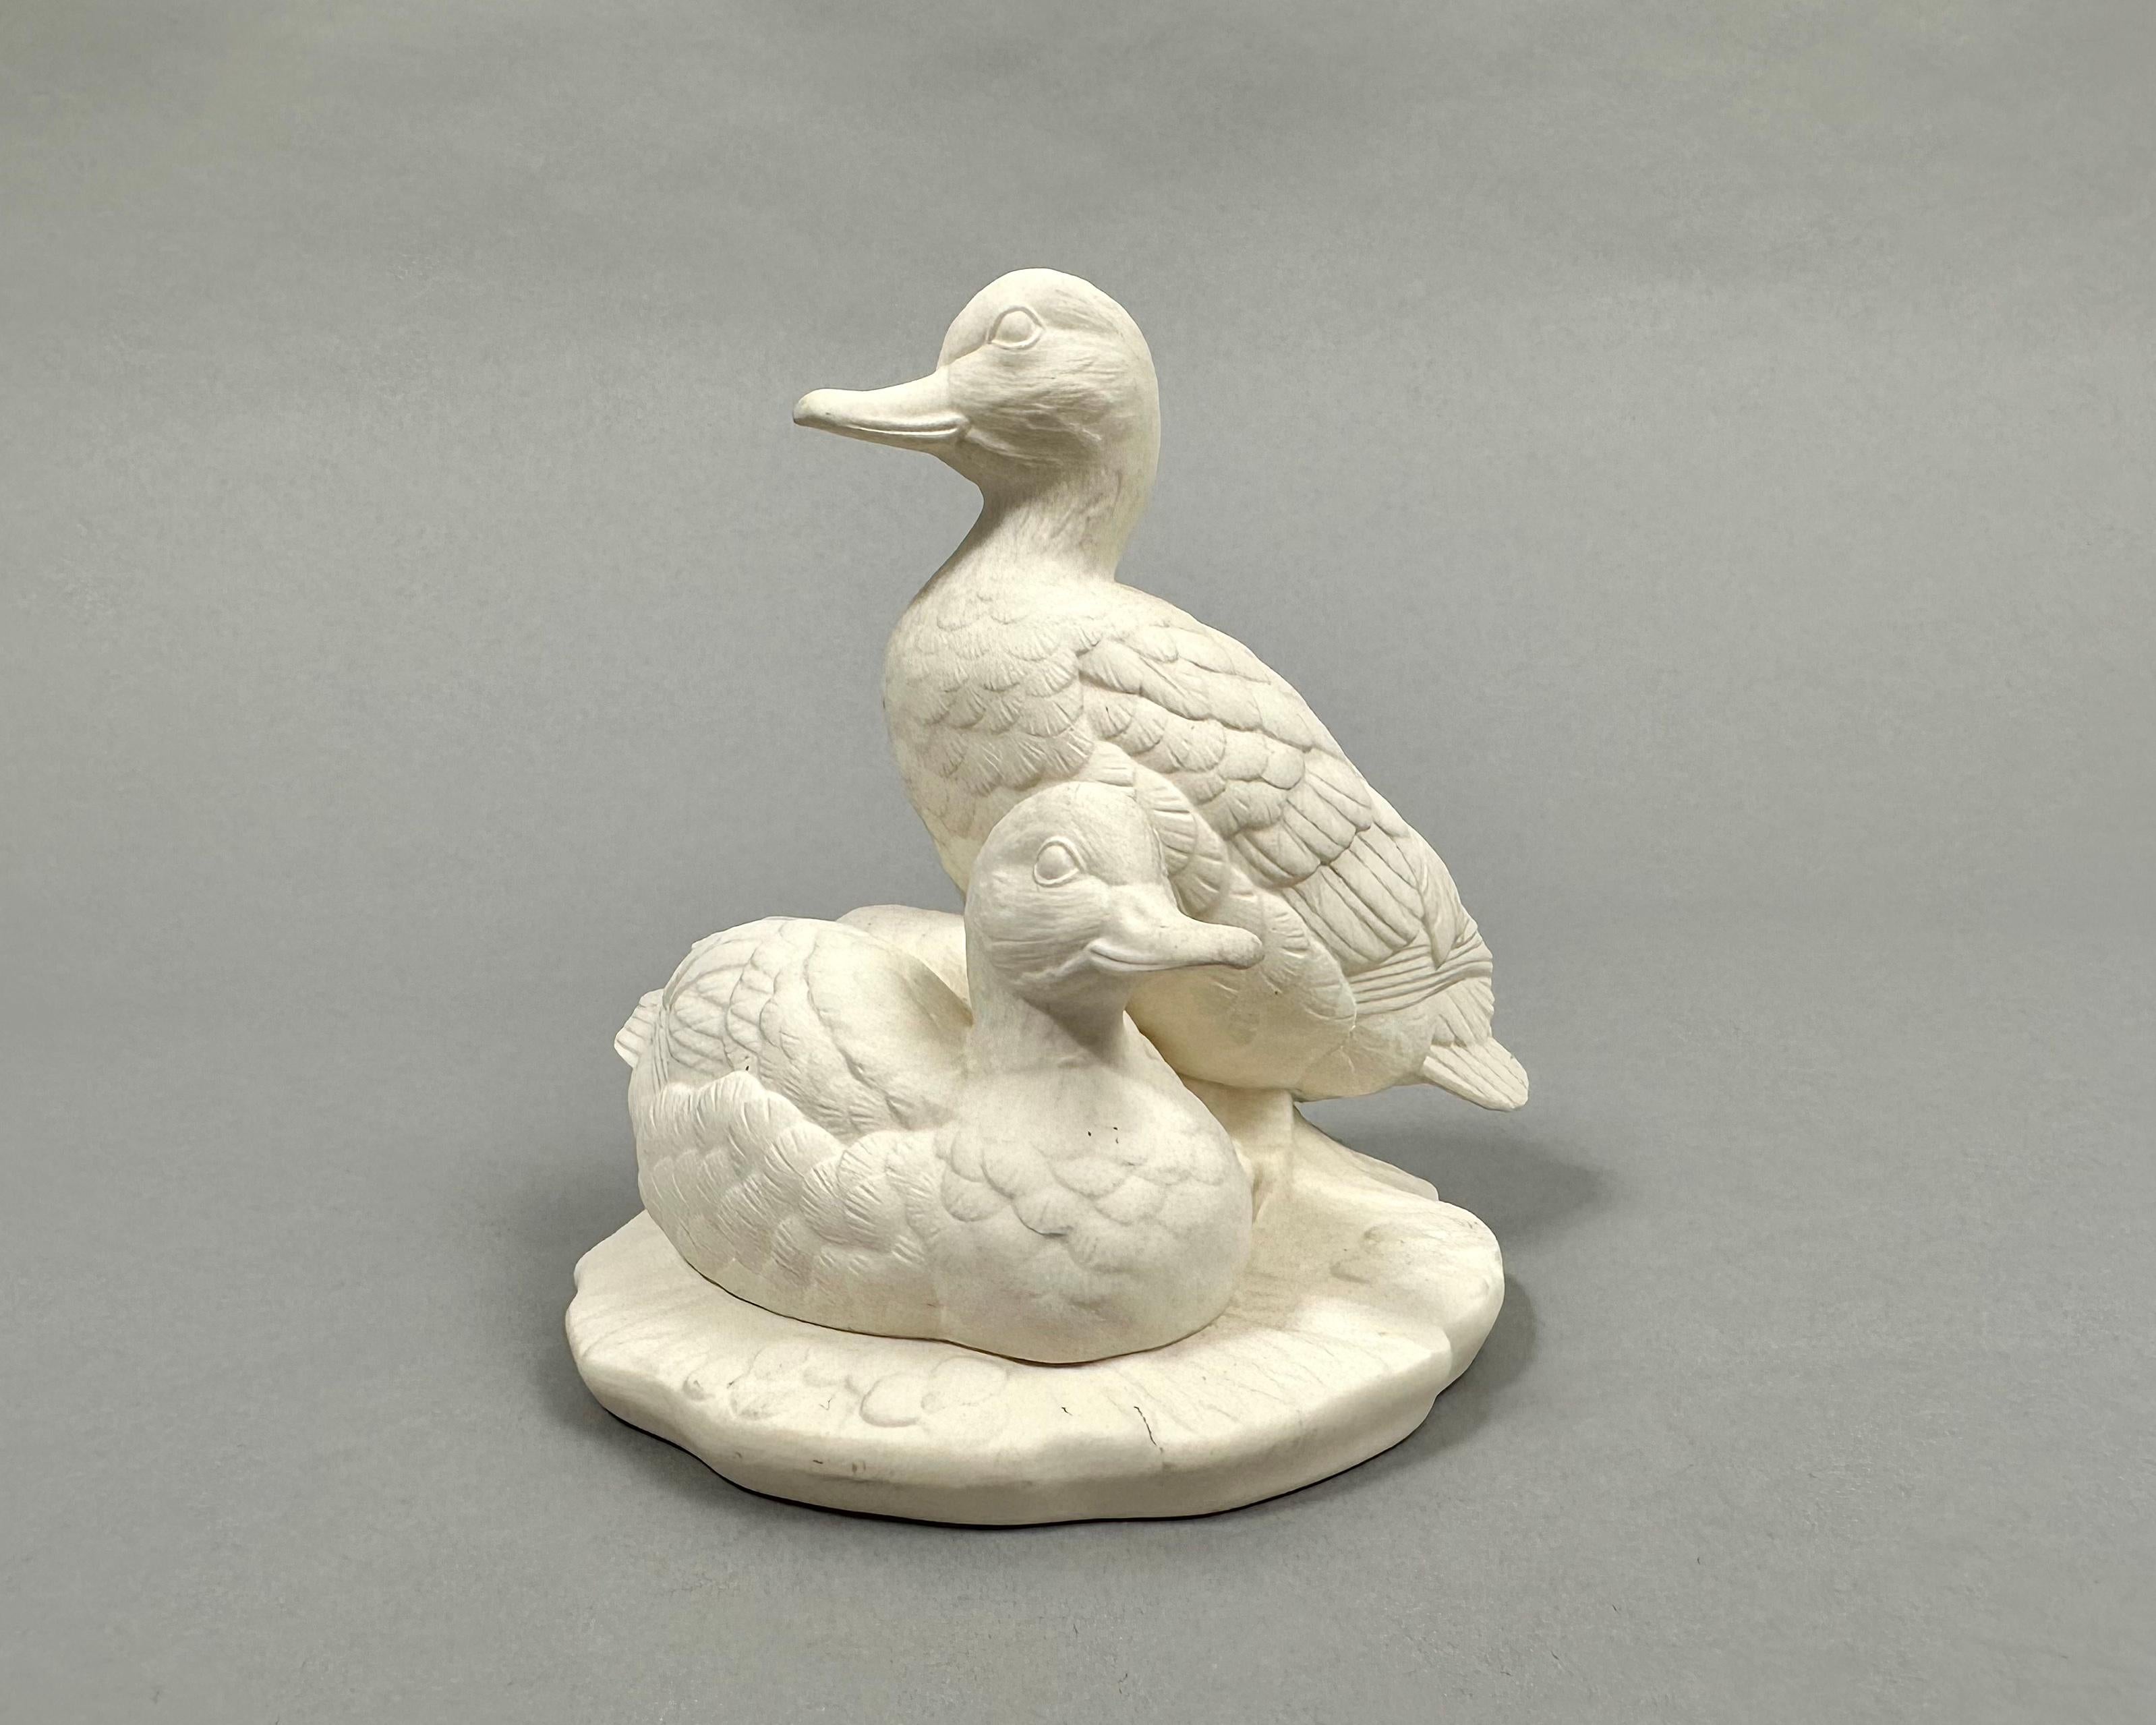 The highly detailed German white porcelain figurine Ducks by GOEBEL - Germany, 1960s.

Very rare and outstanding hard-to-find figurine. It has the finest detail.

Skillfully traced details, completely handmade.

Stamped on the bottom.

The figurine